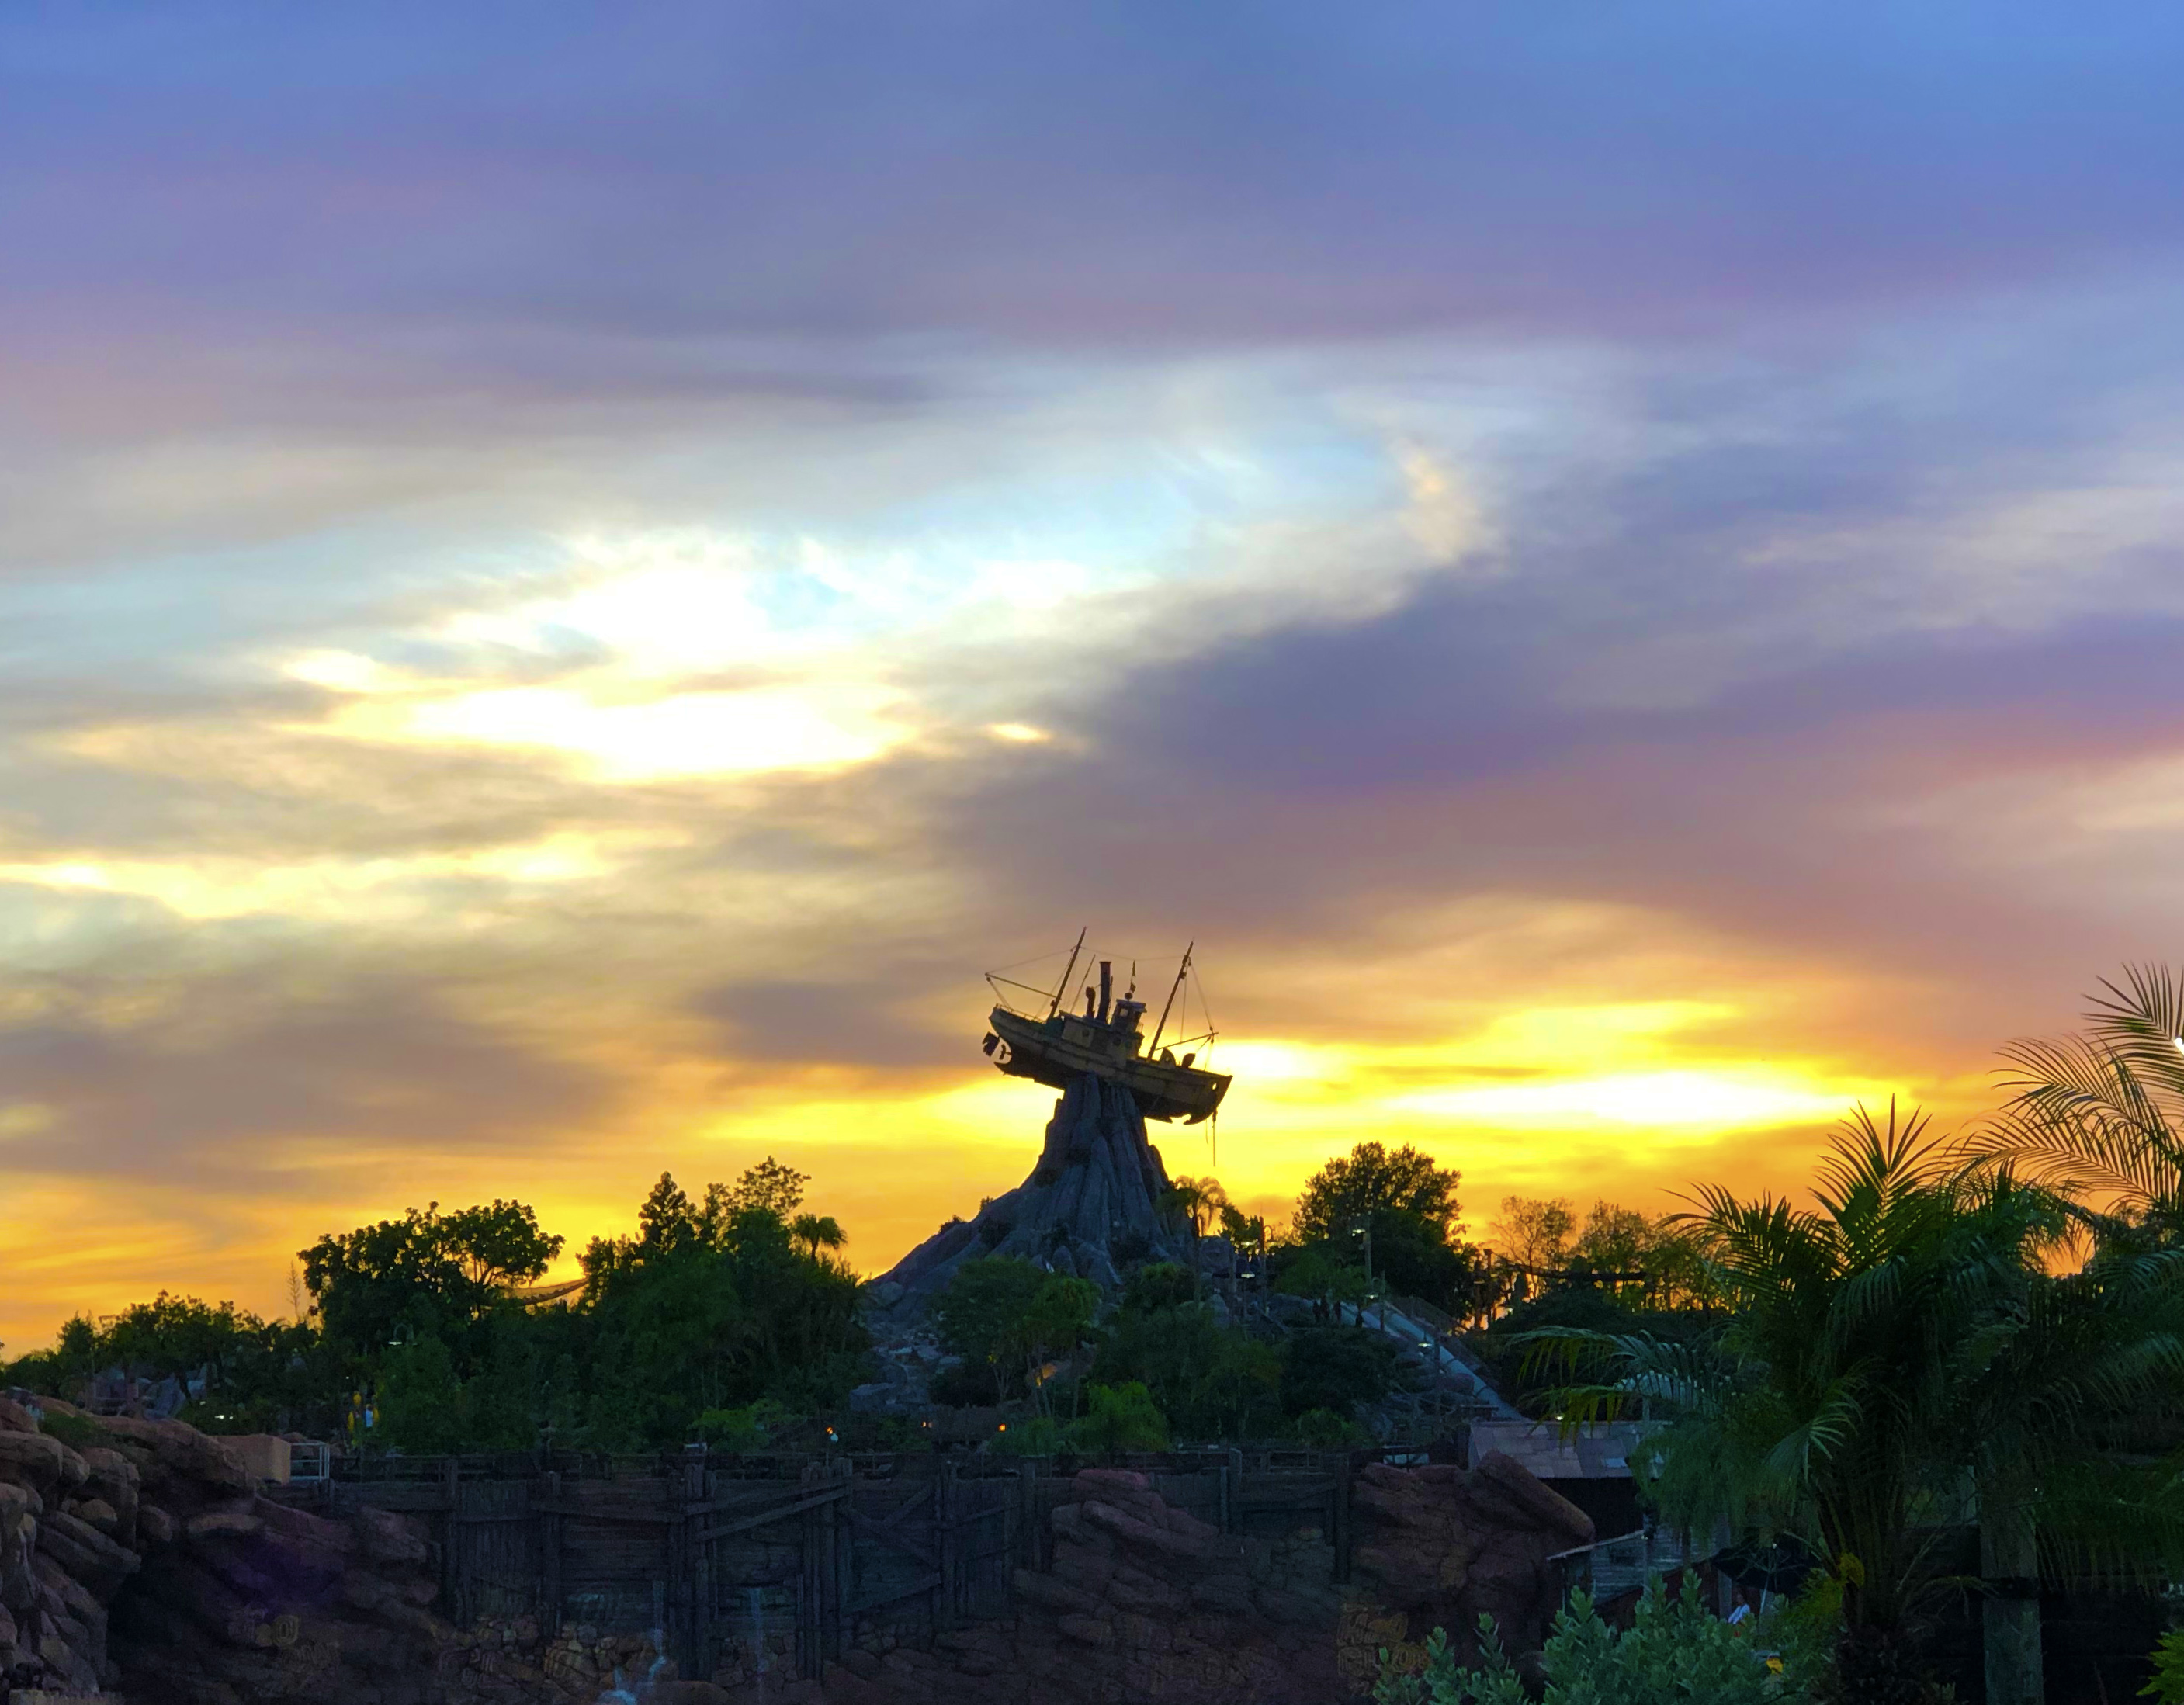 Disney's Typhoon Lagoon shipwreck focal point atop a hill overlooking the sunset.